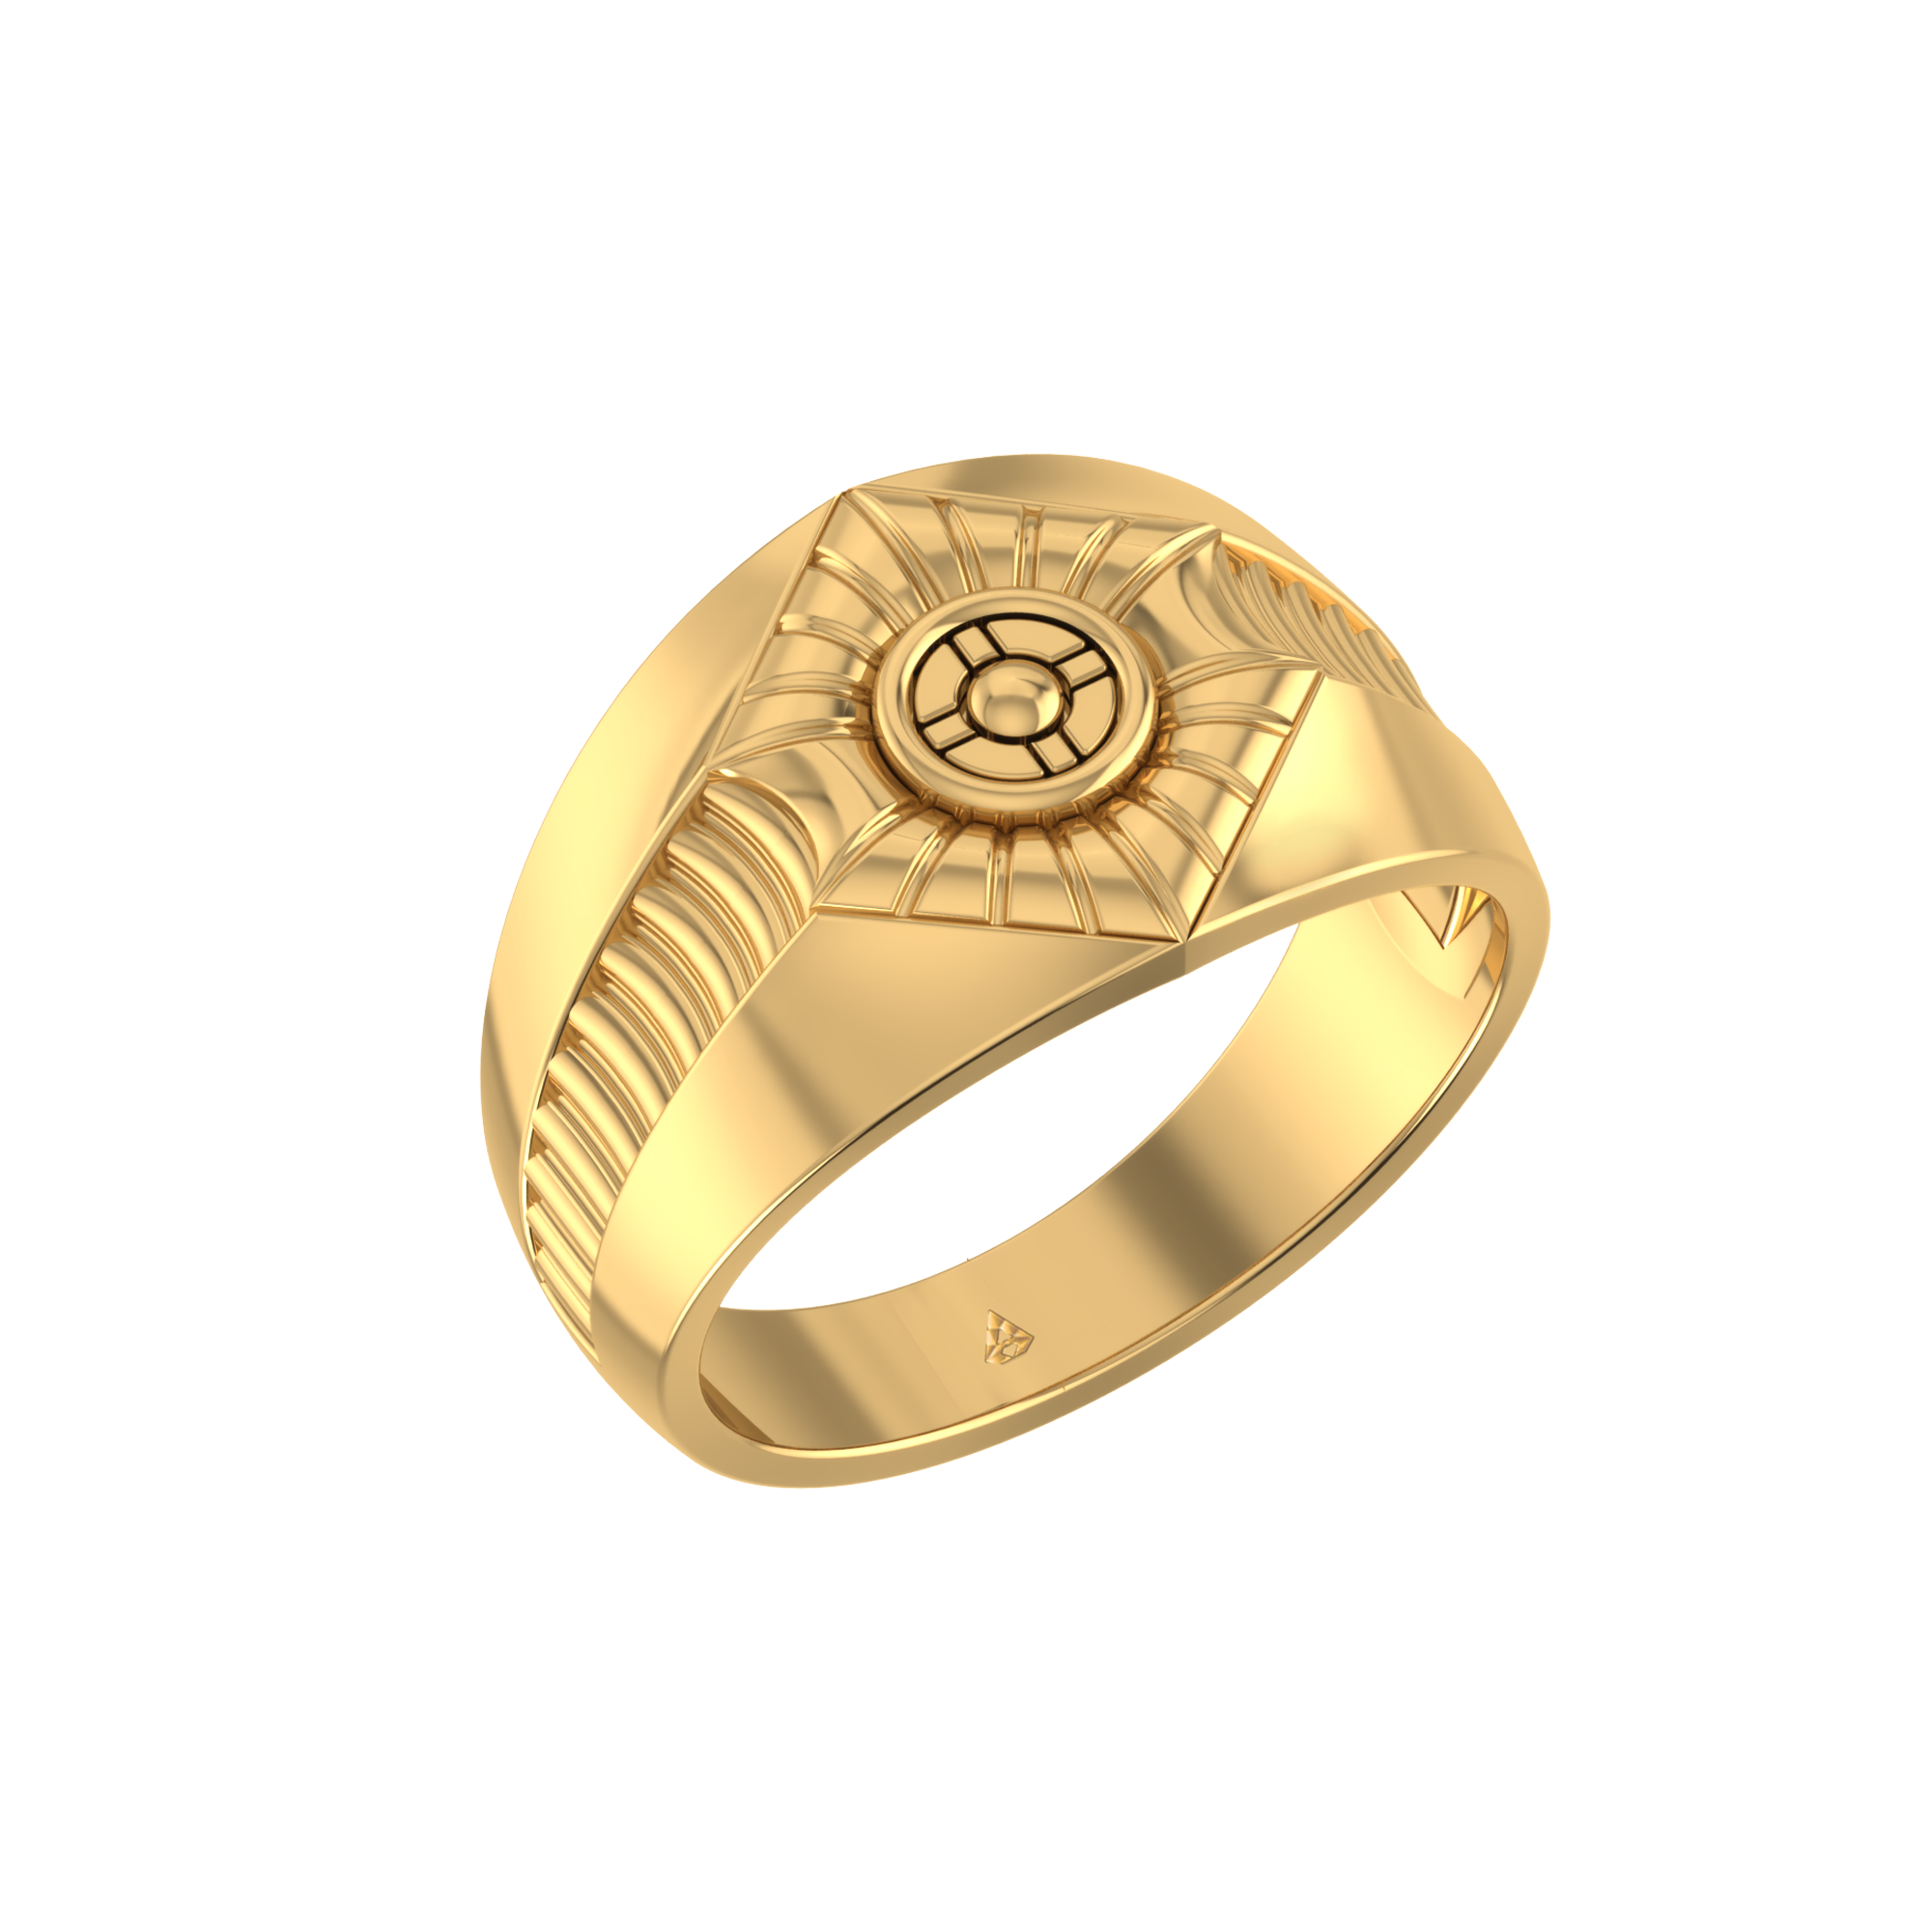 BRBRIK Gold Plated Heavy Design, Engagement Fashion Ring for Men Jewellery